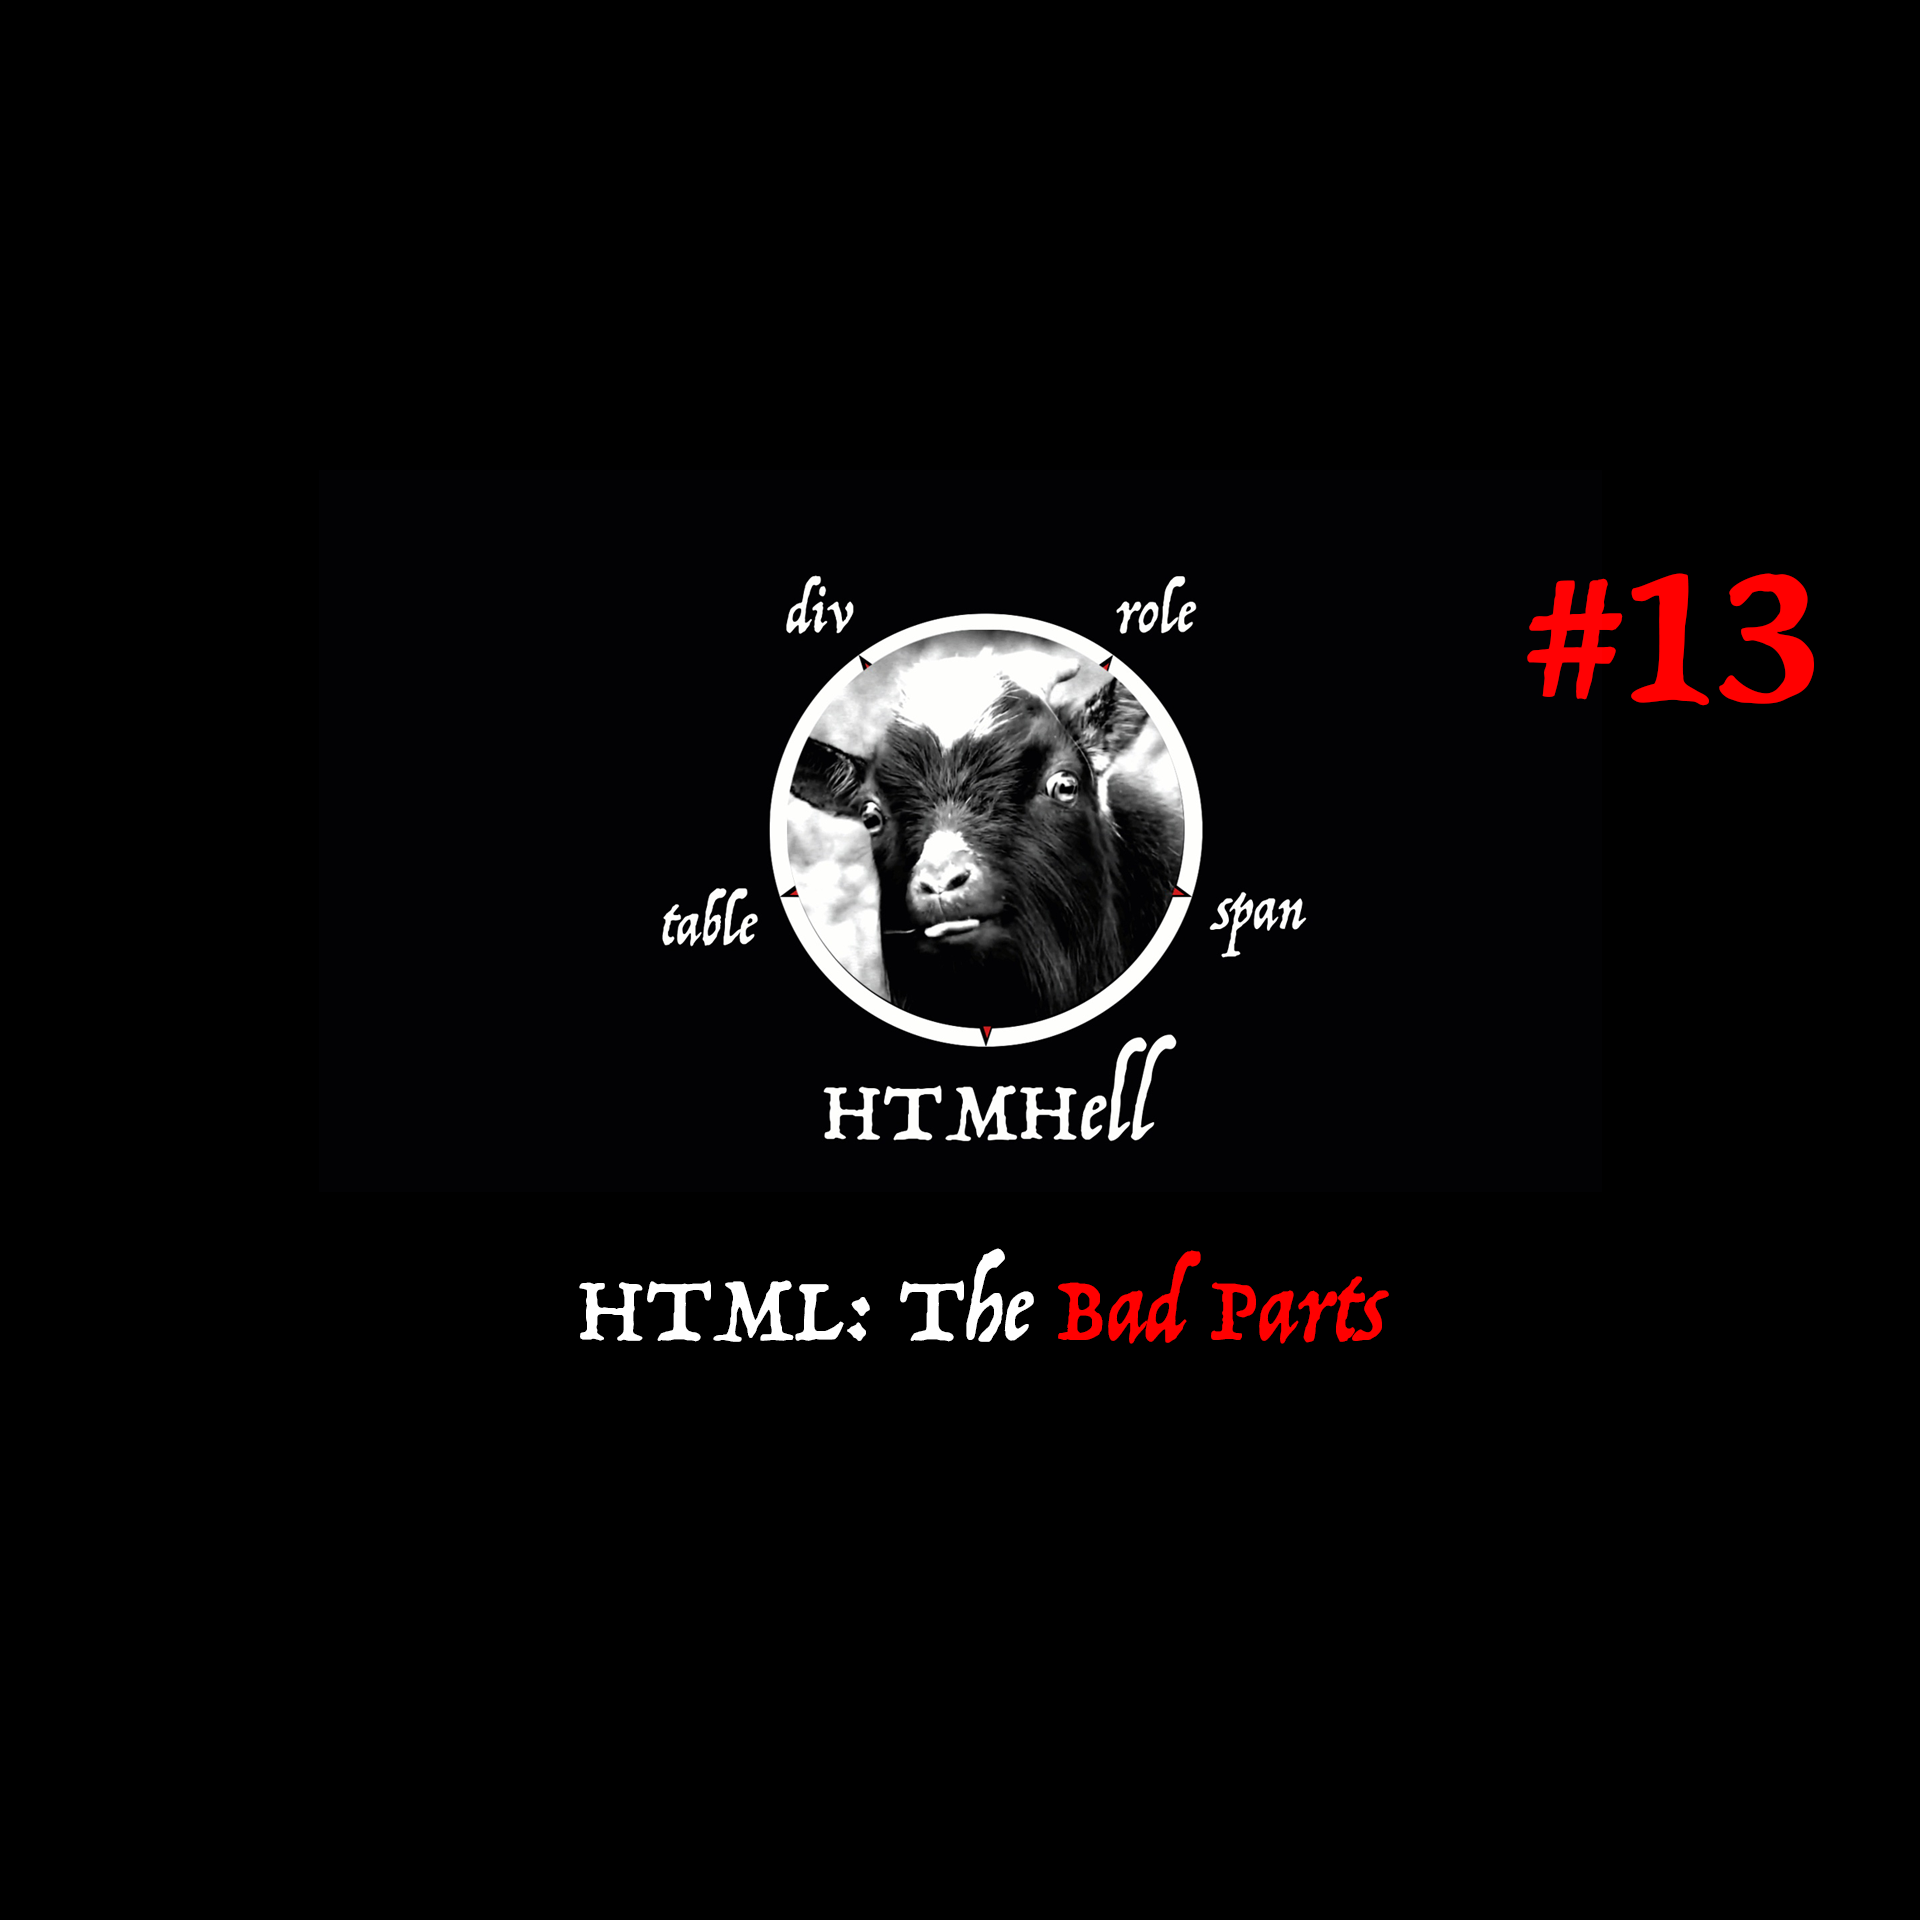 Cover Image for External Article Titled HTML: The Bad Parts - HTMHell